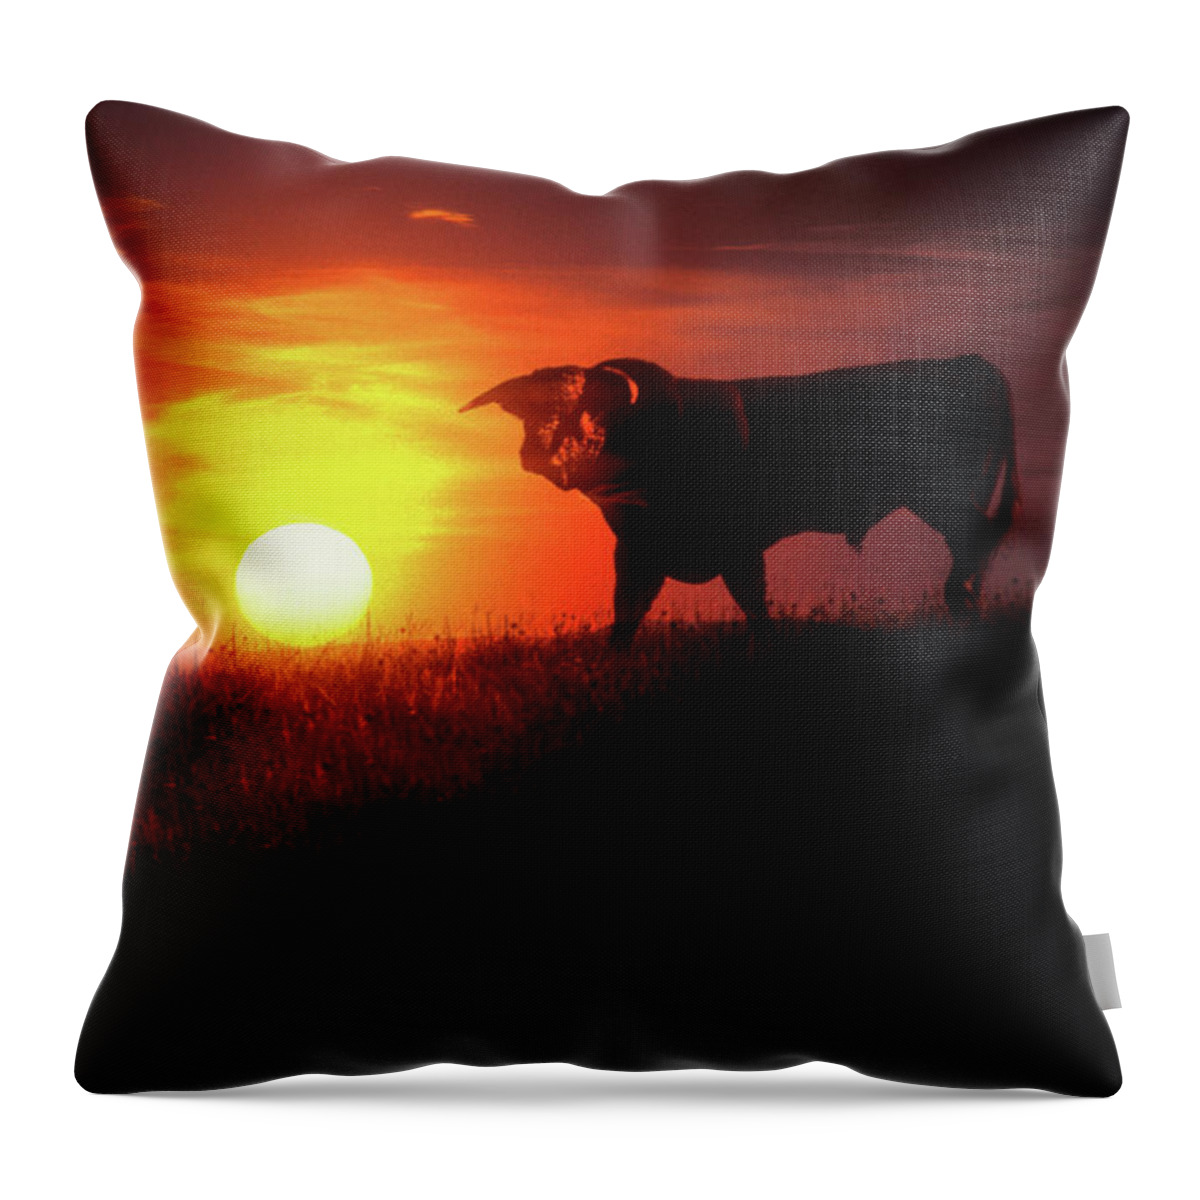 One Animal Throw Pillow featuring the photograph A Bull In A Field At Sunrise by Lyle Leduc